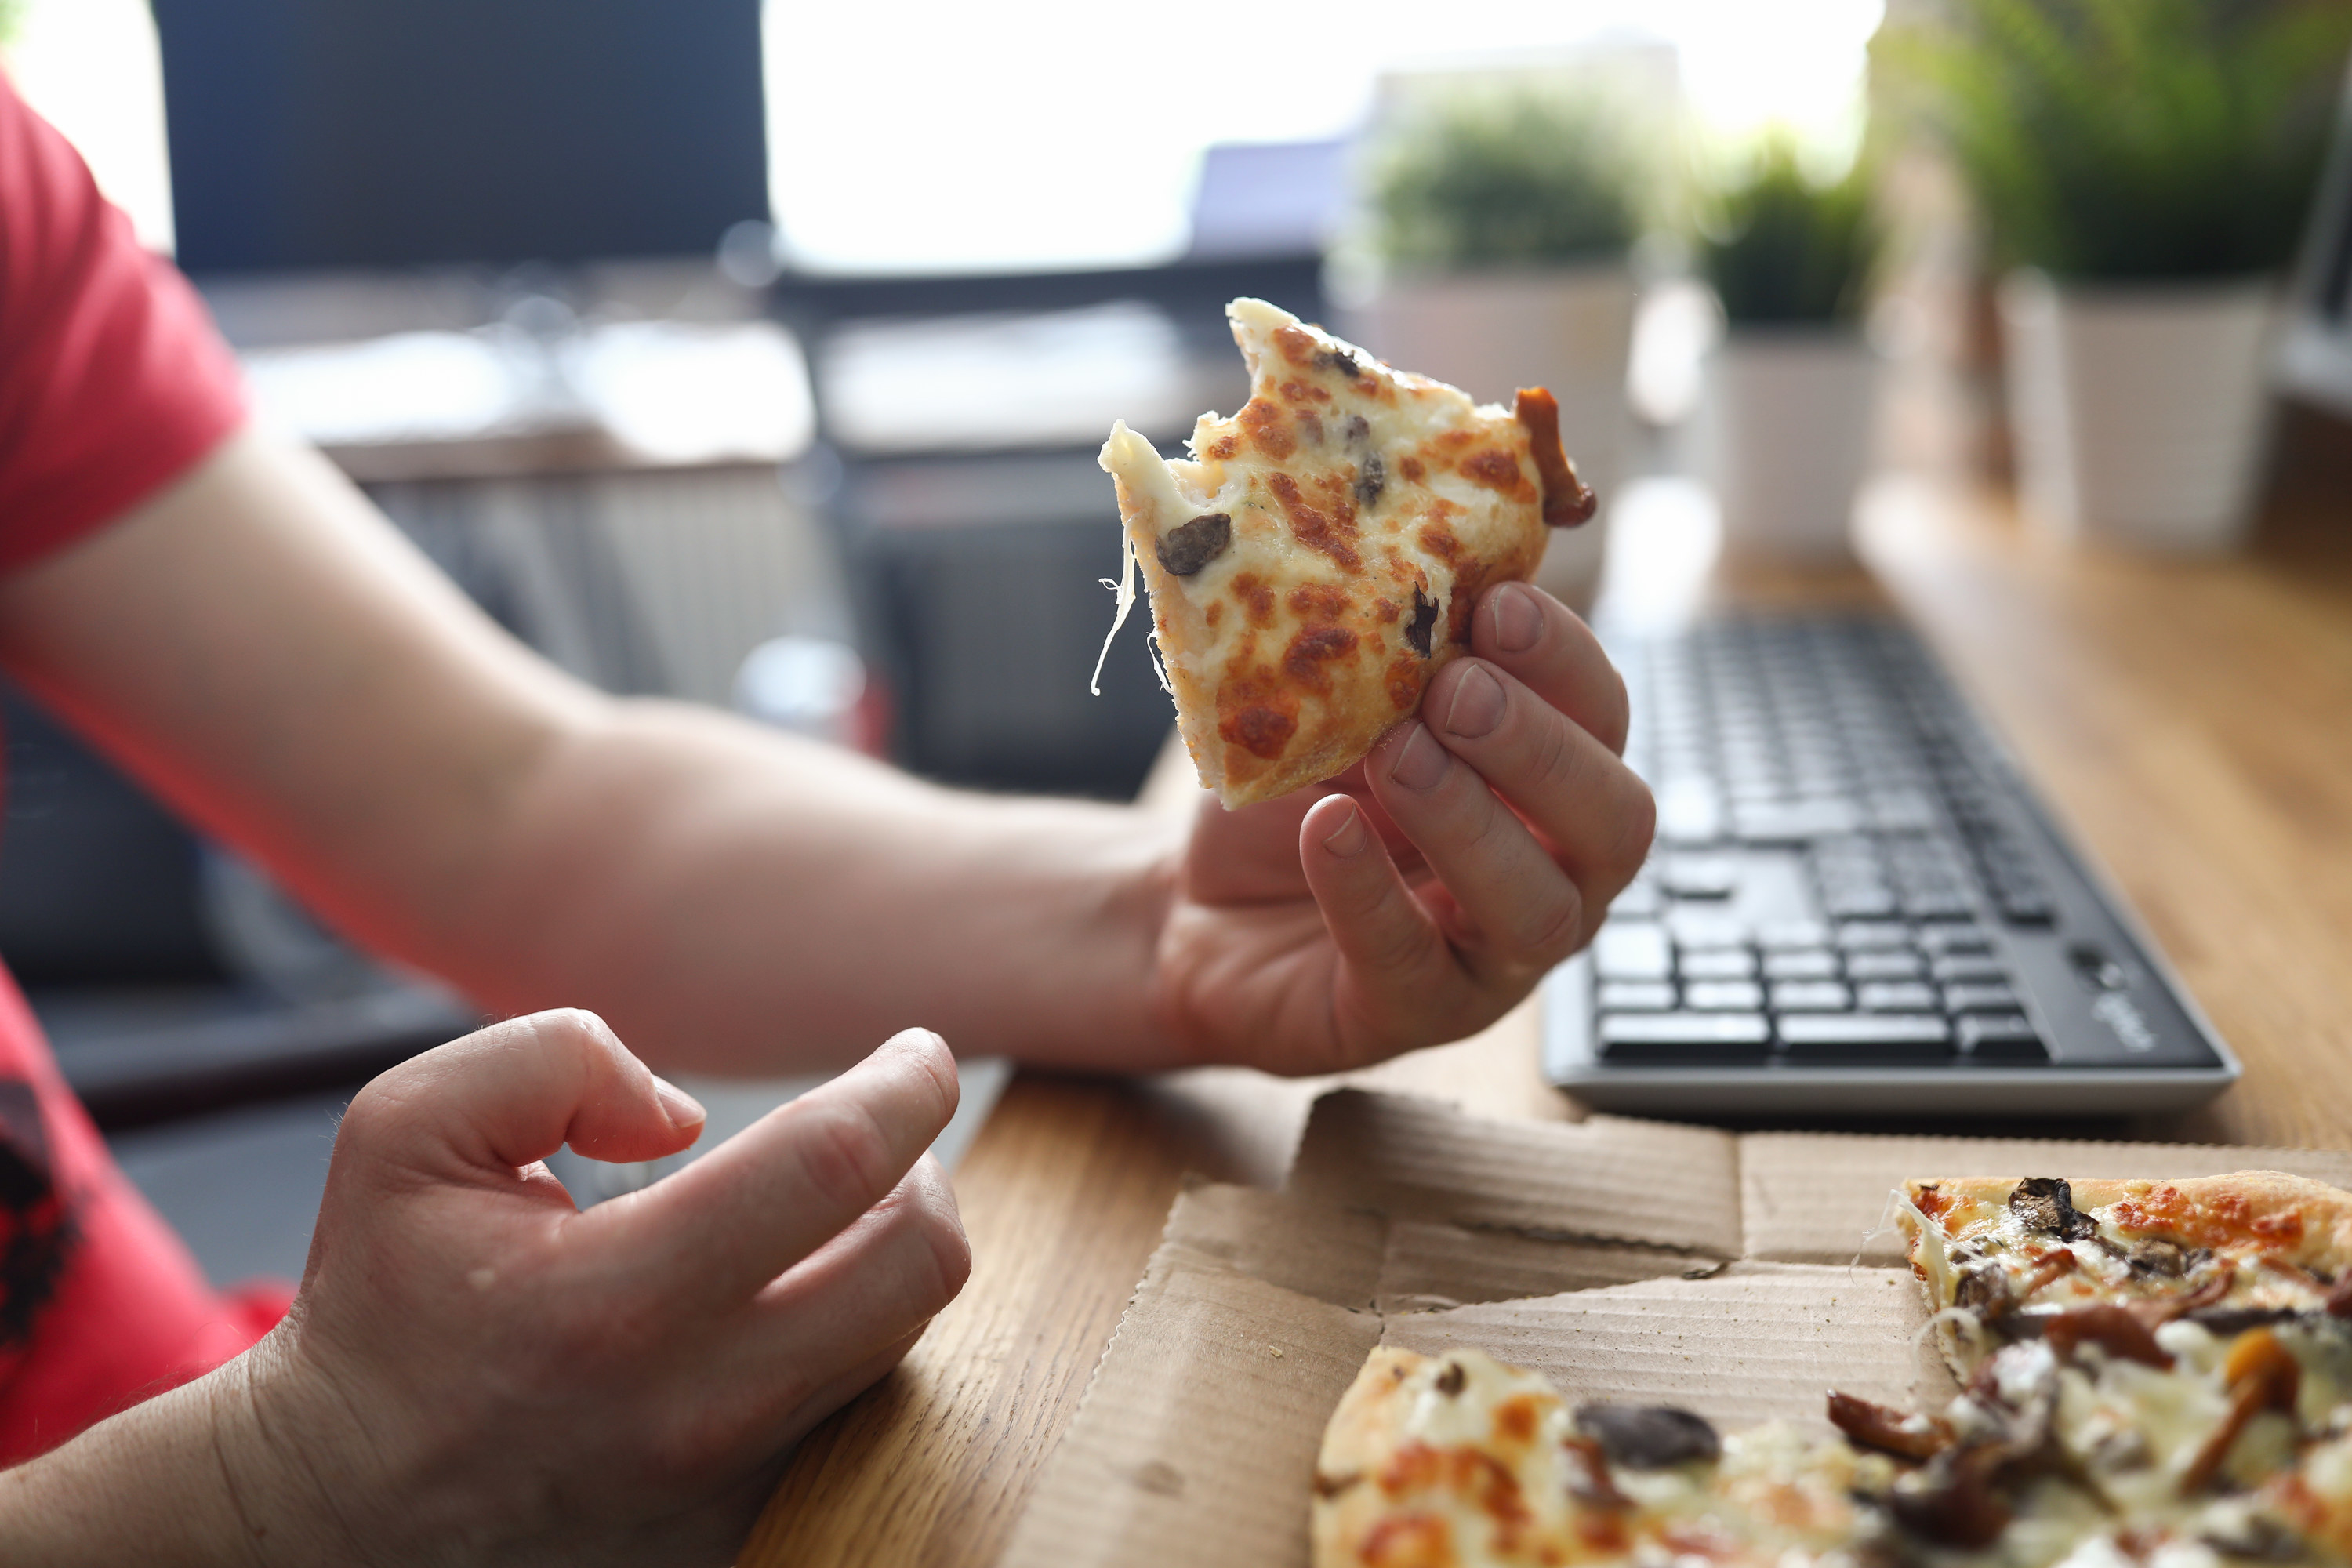 Hands holding a half-eaten slice of pizza at a desk with a keyboard